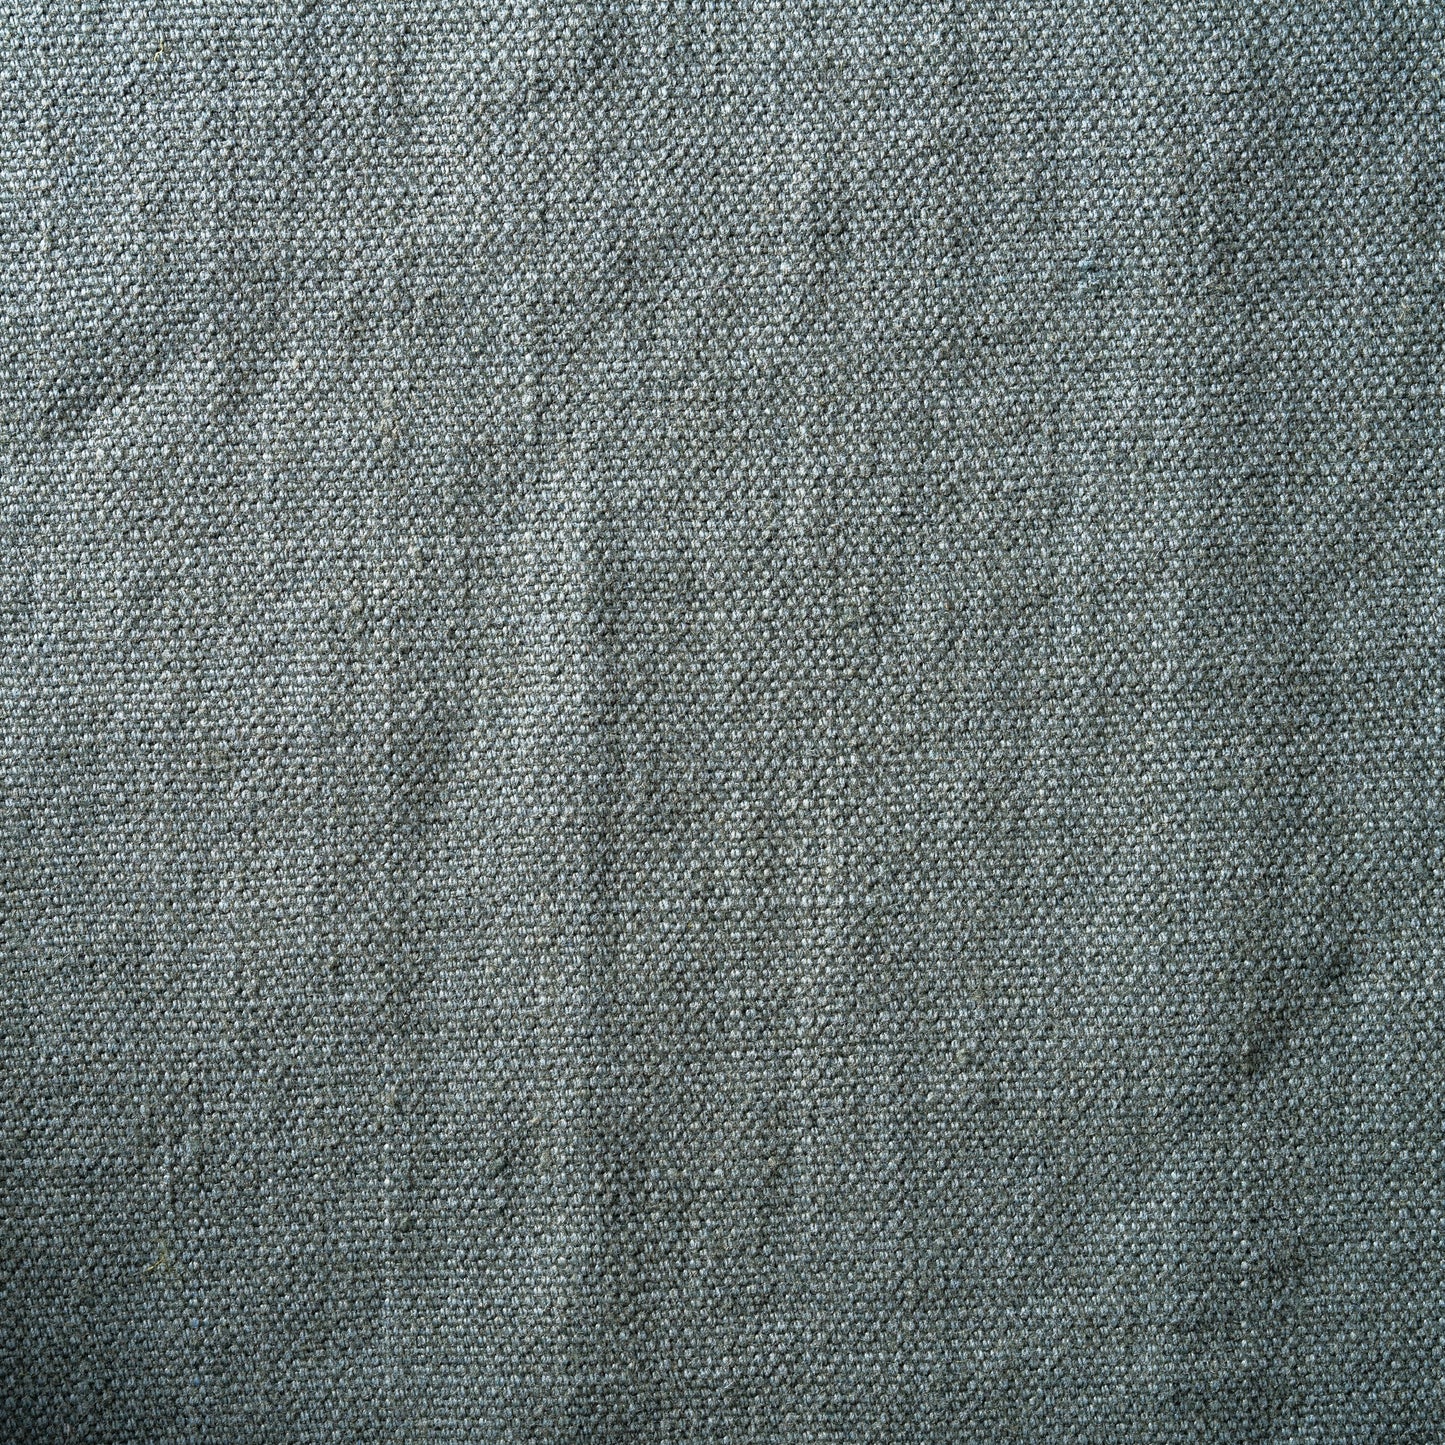 14.3 oz/sq yard 100% Upholstery/ Slipcover Weight Linen in Dusty Teal Swatch